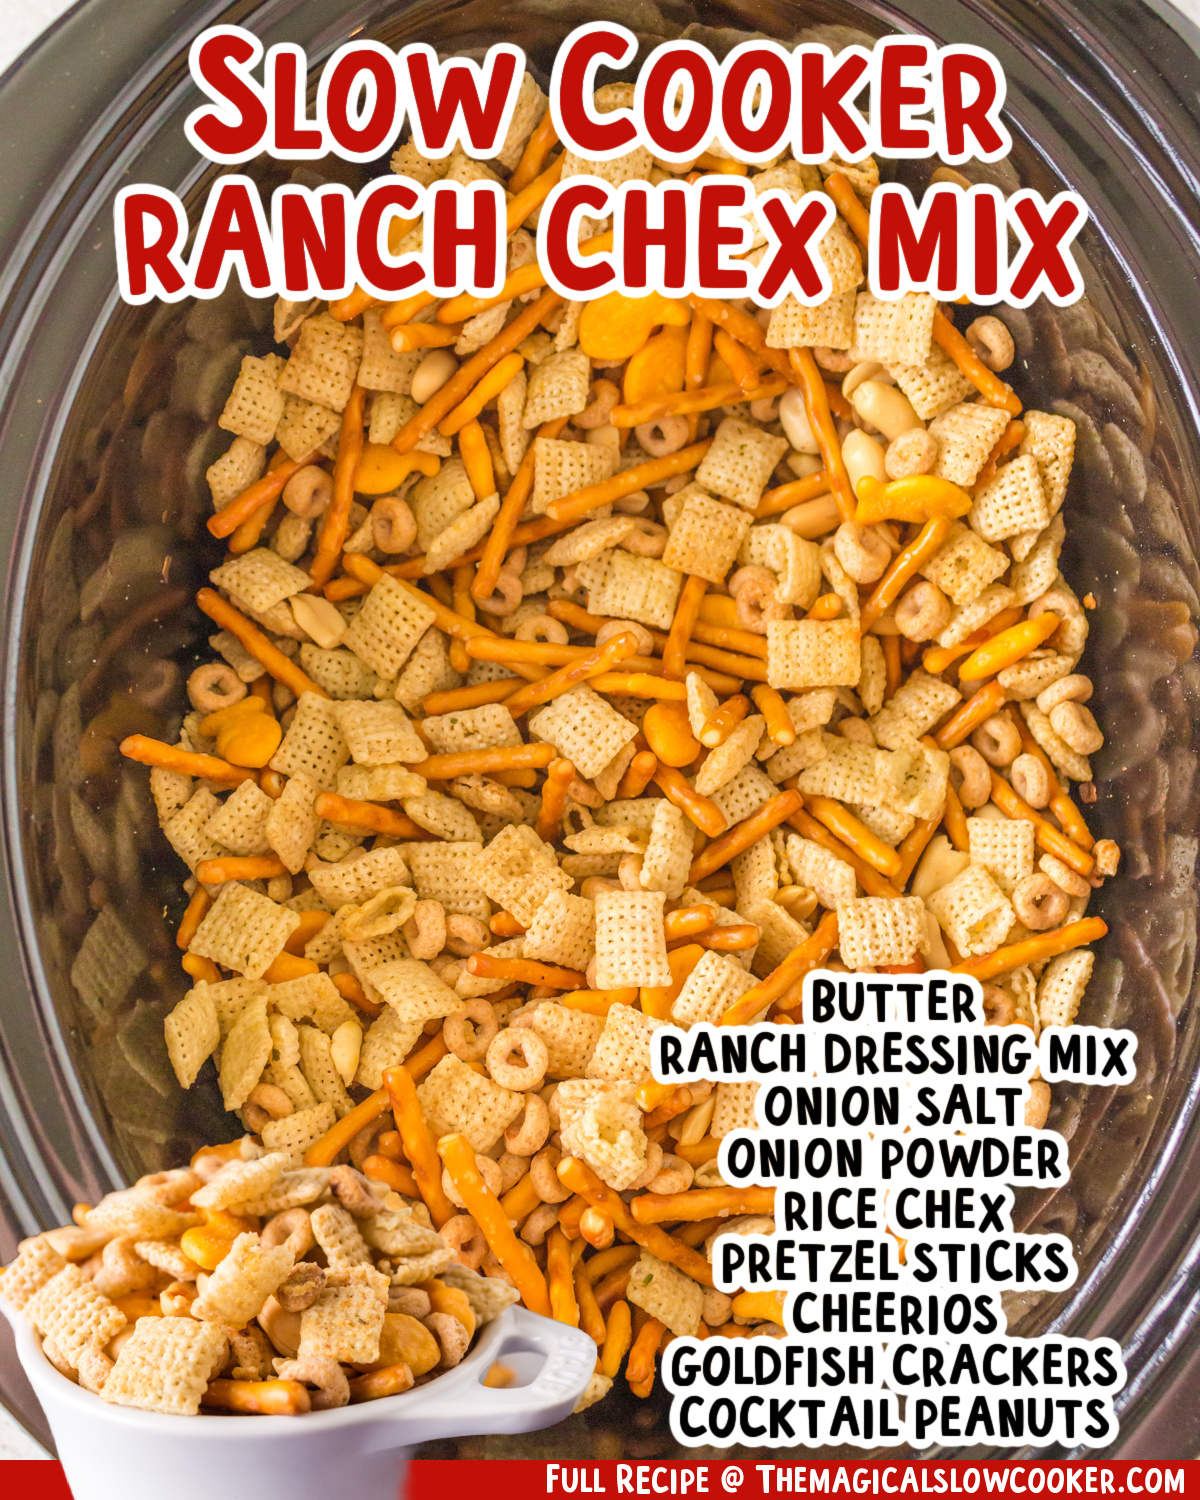 two images of slow cooker ranch chex mix with text list of ingredients.